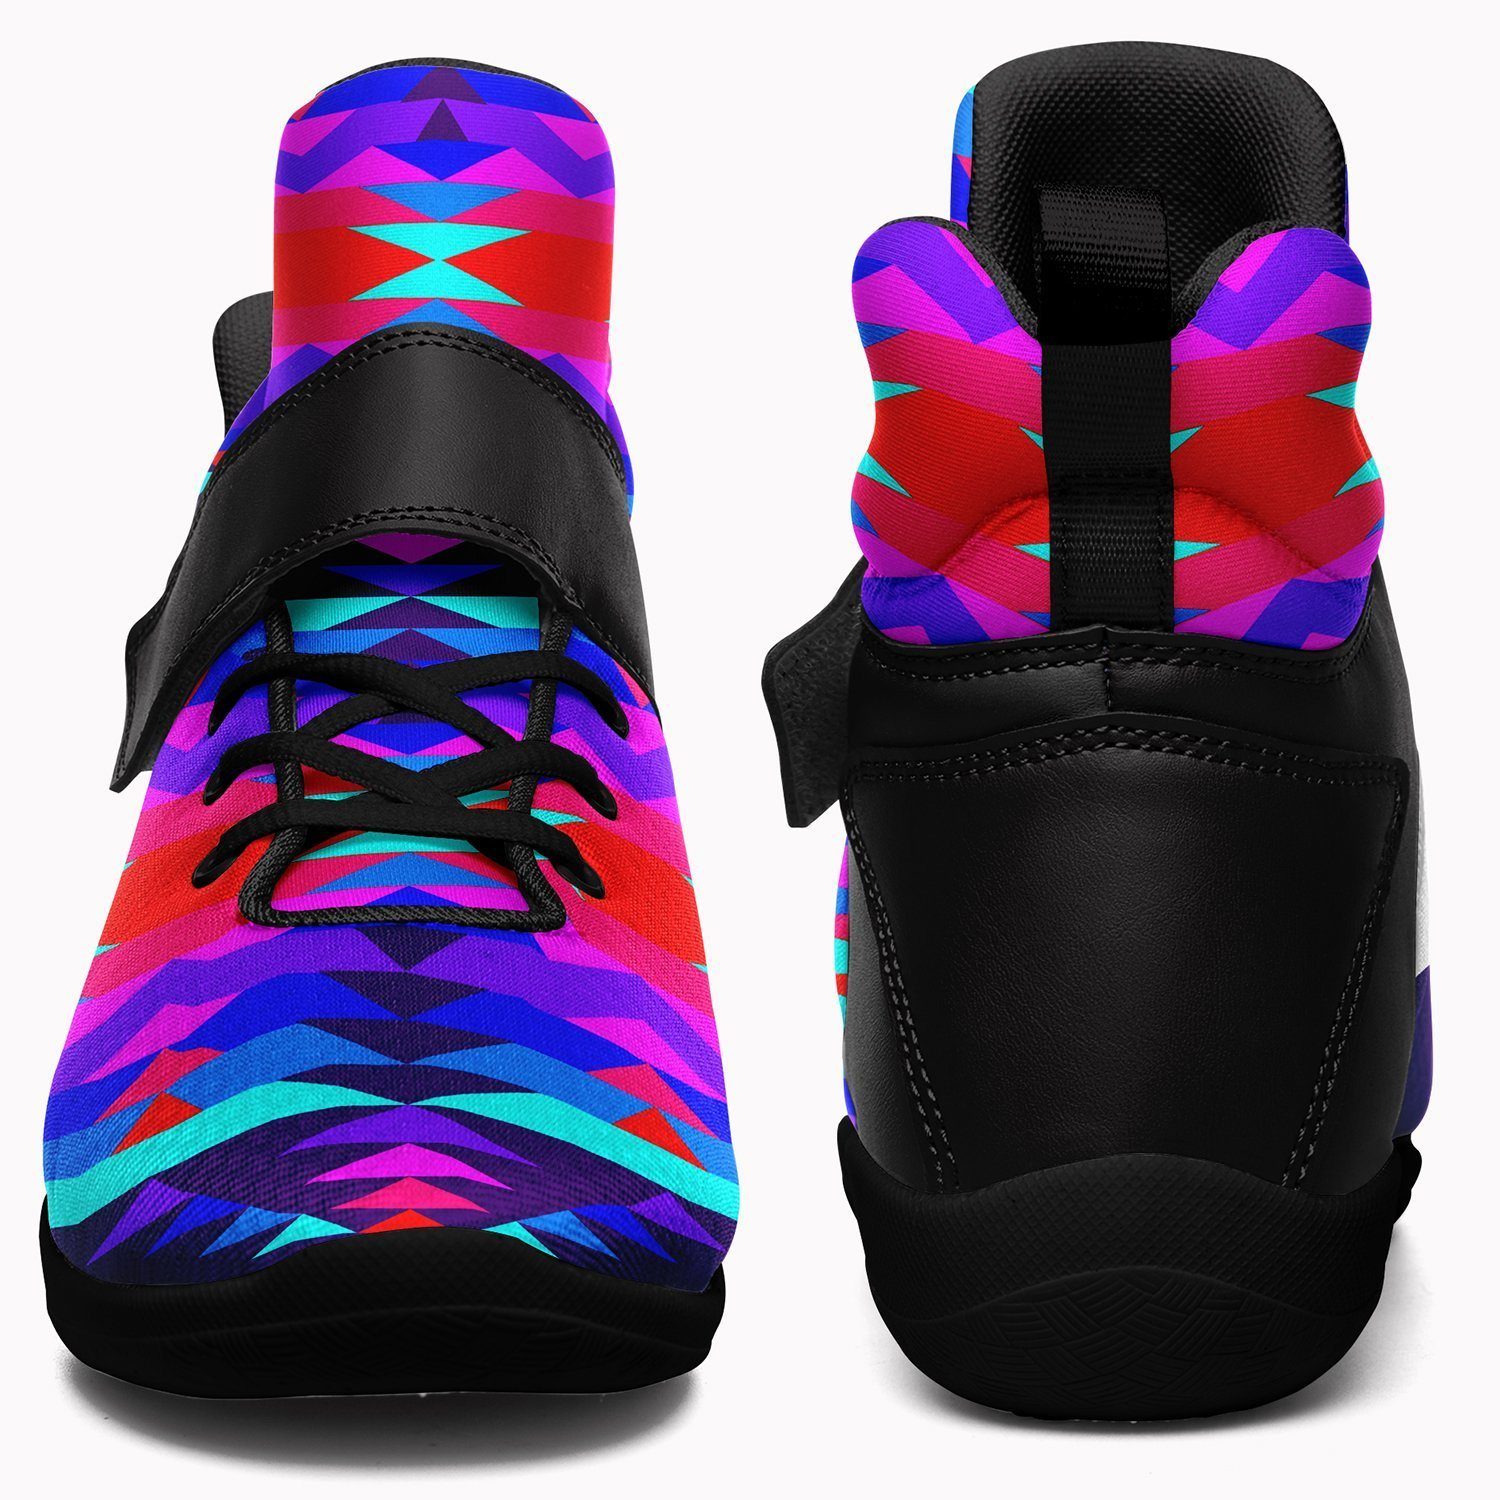 Visions of Peace Ipottaa Basketball / Sport High Top Shoes - Black Sole 49 Dzine 